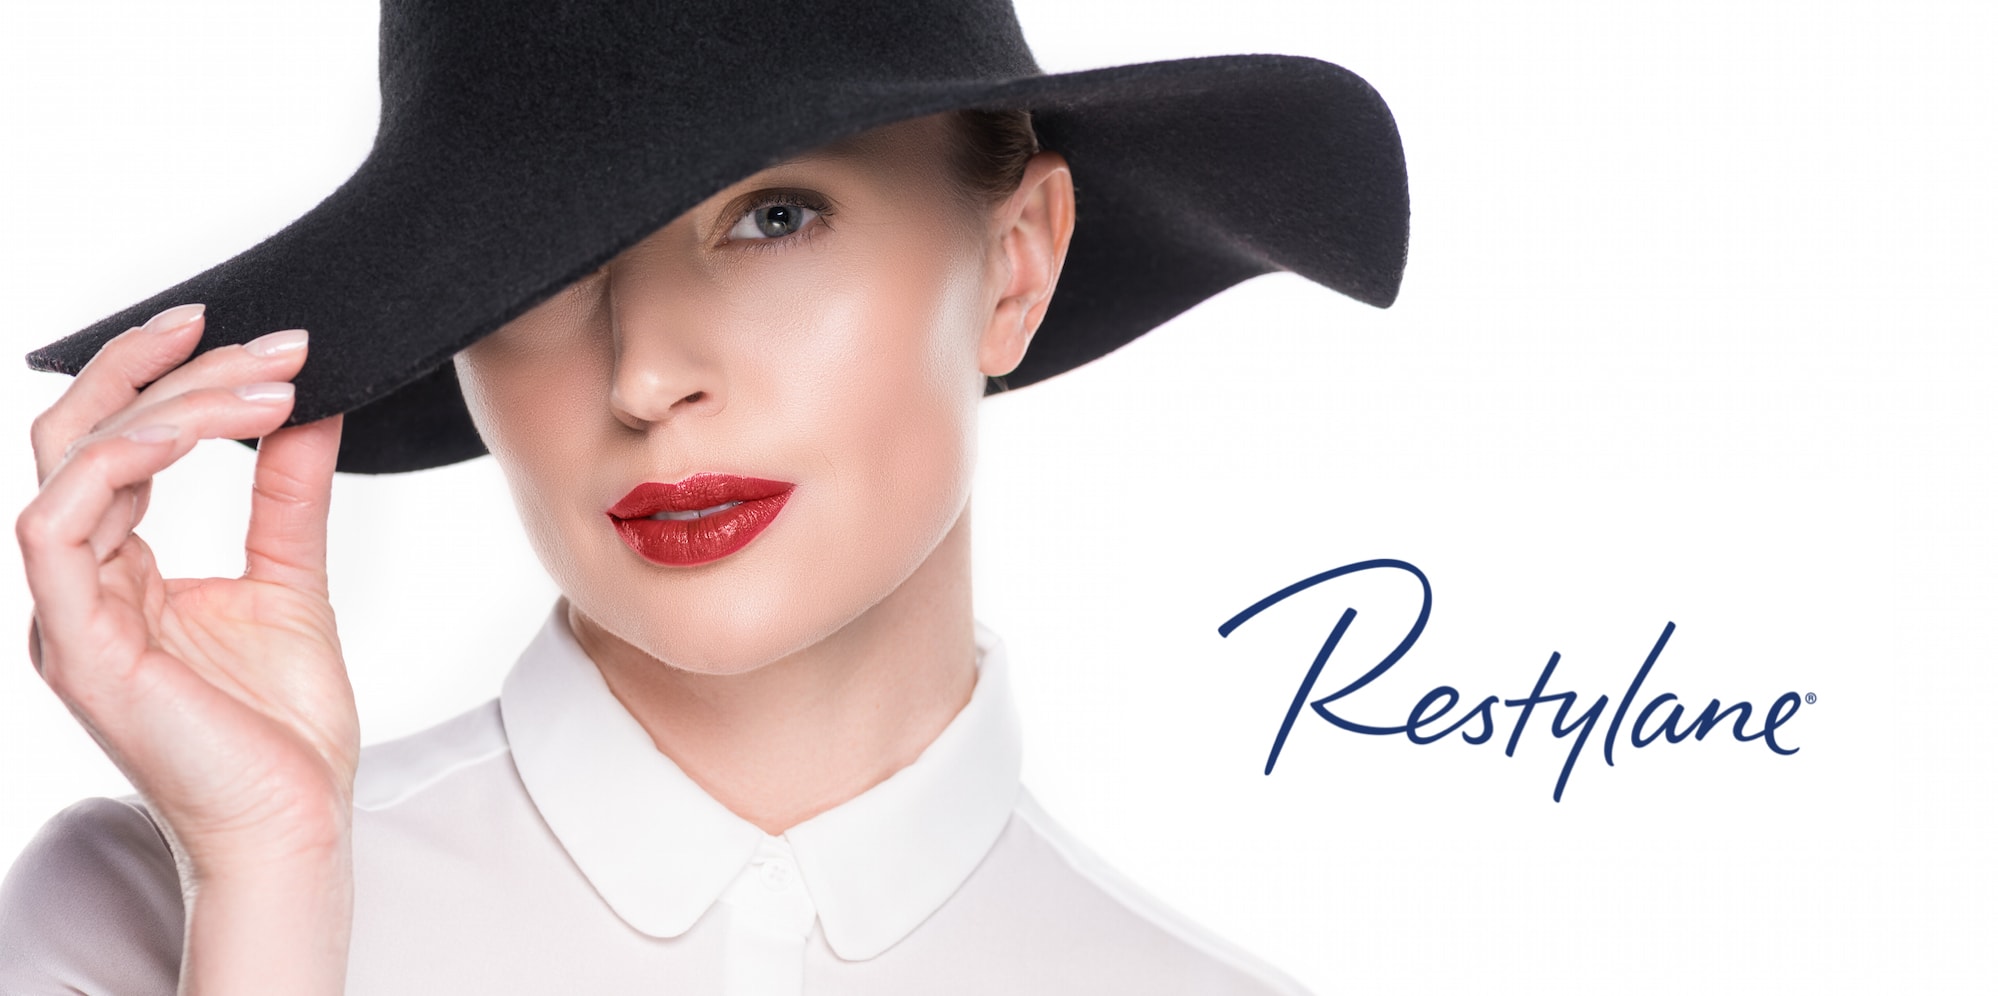 How Restylane revitalizes the look of the under eye area